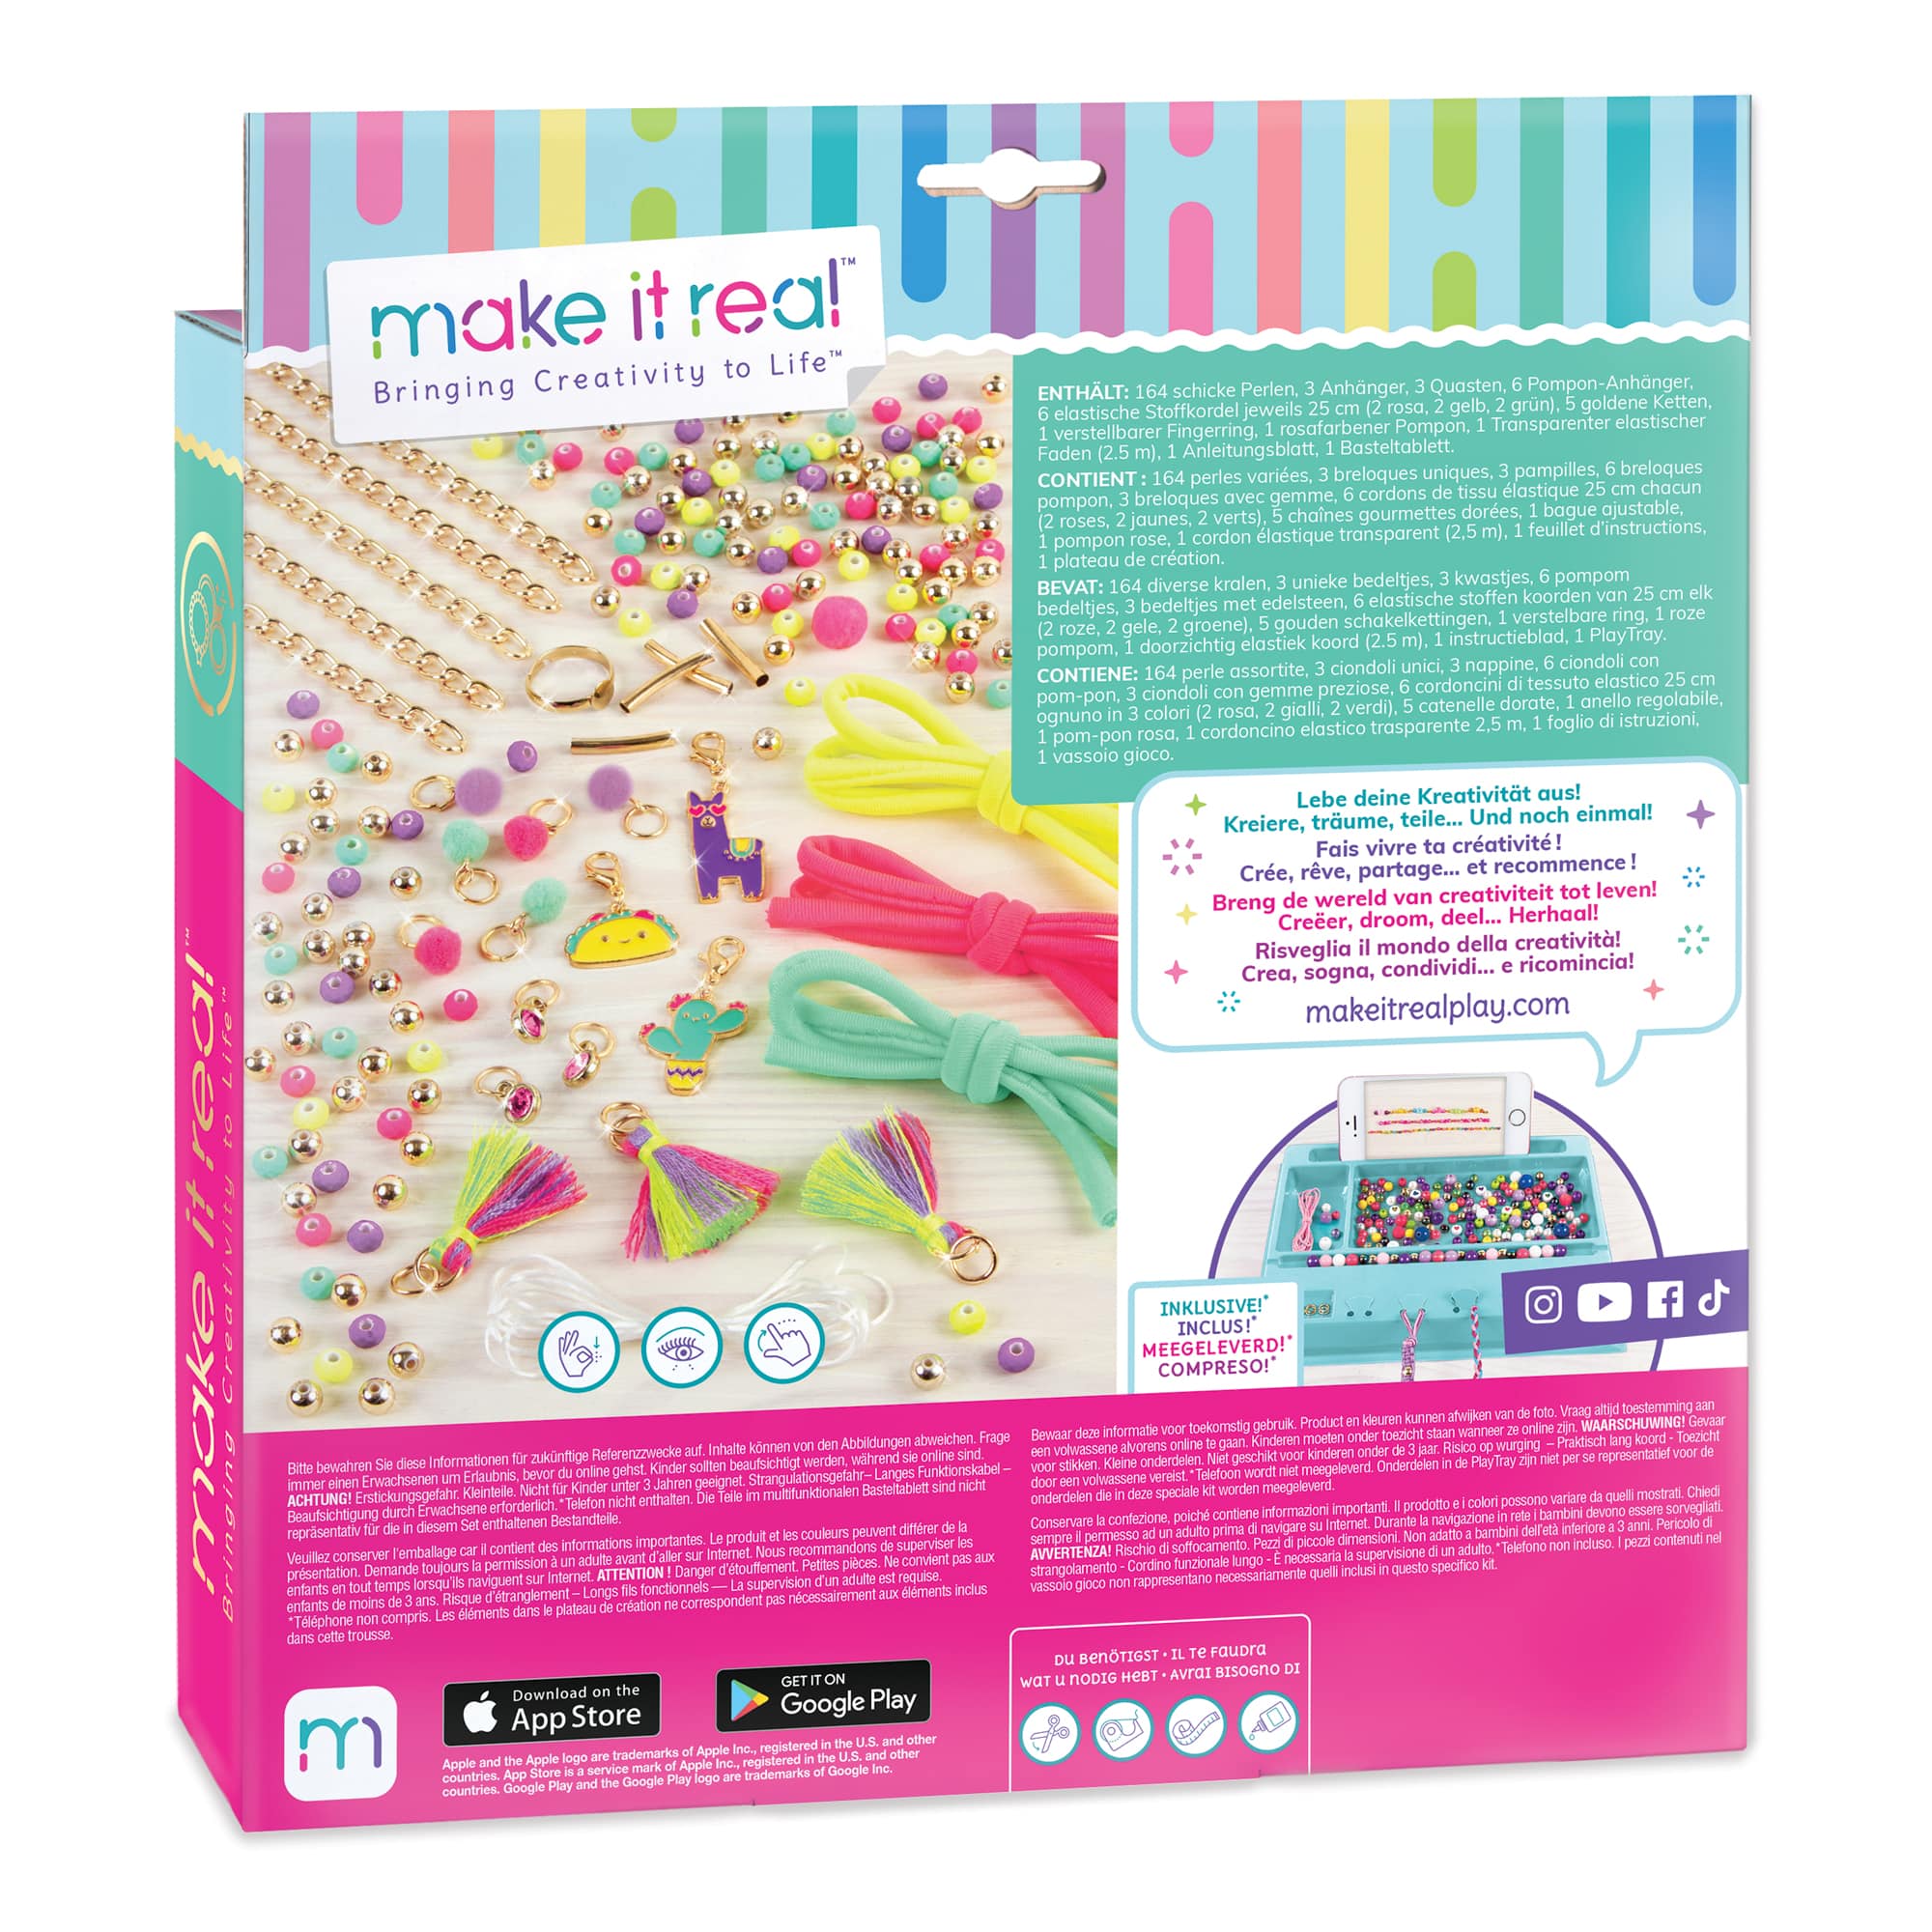 Make It Real&#x2122; Neo-Brite Chains &#x26; Charms Kit